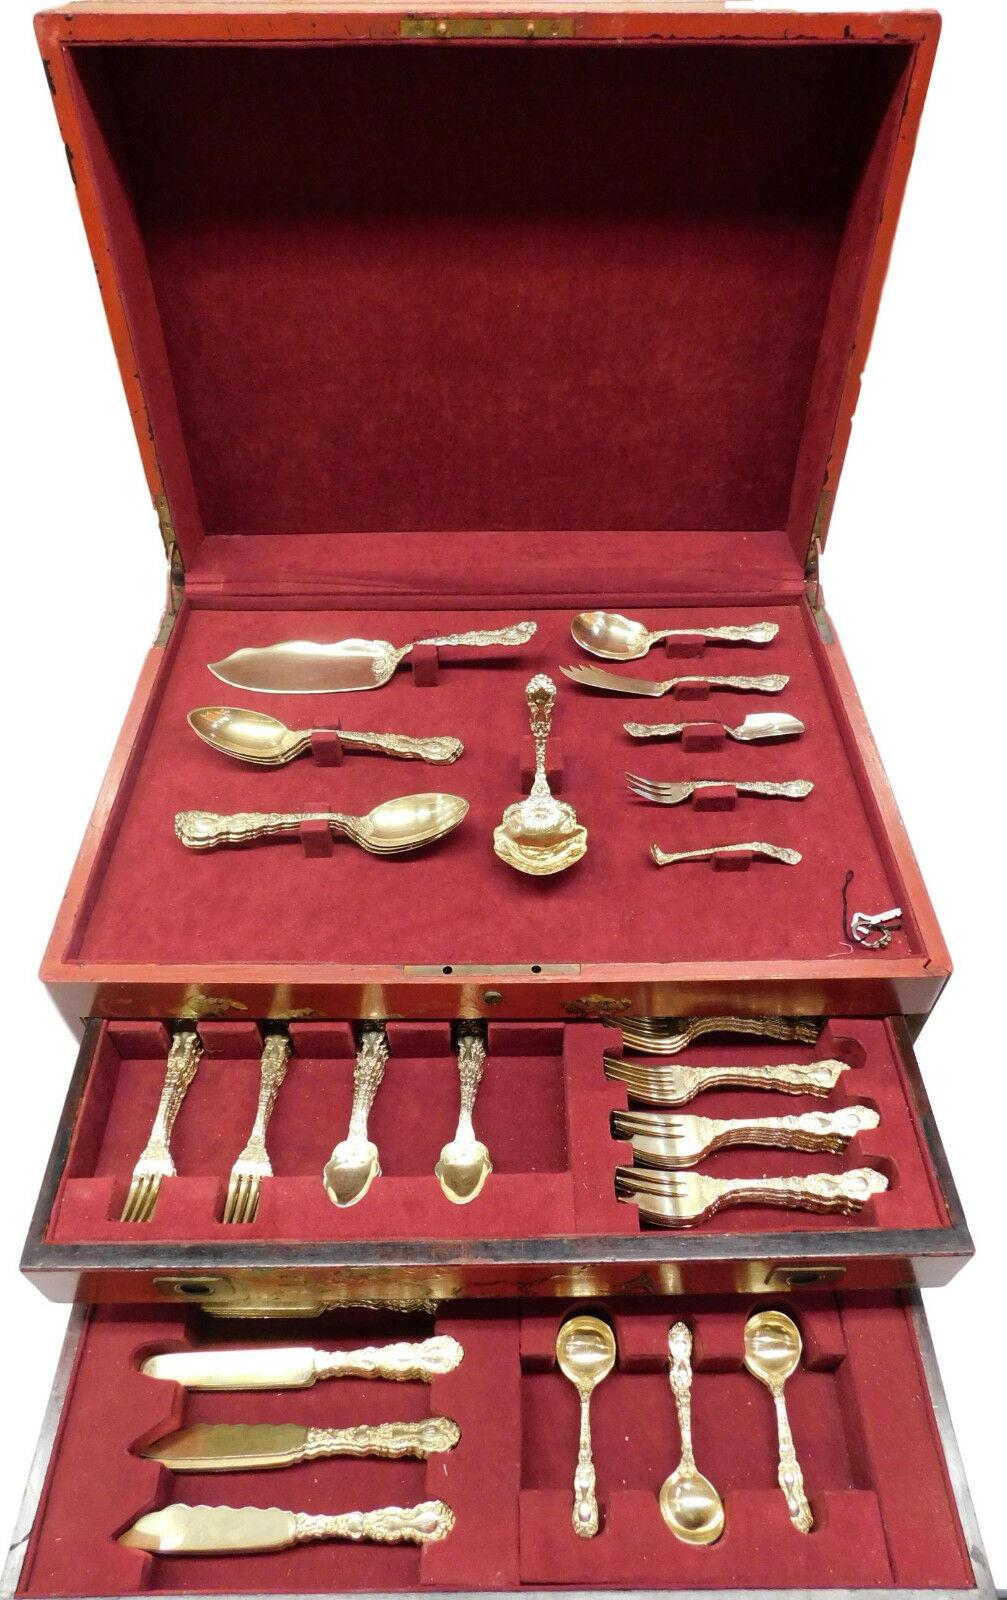 Monumental Imperial Chrysanthemum by Gorham Vermeil (completely gold washed) sterling silver flatware set, 157 pieces in the original vintage fitted chest. Chrysanthemum flowers run down both the back and front side of the handle with chrysanthemum